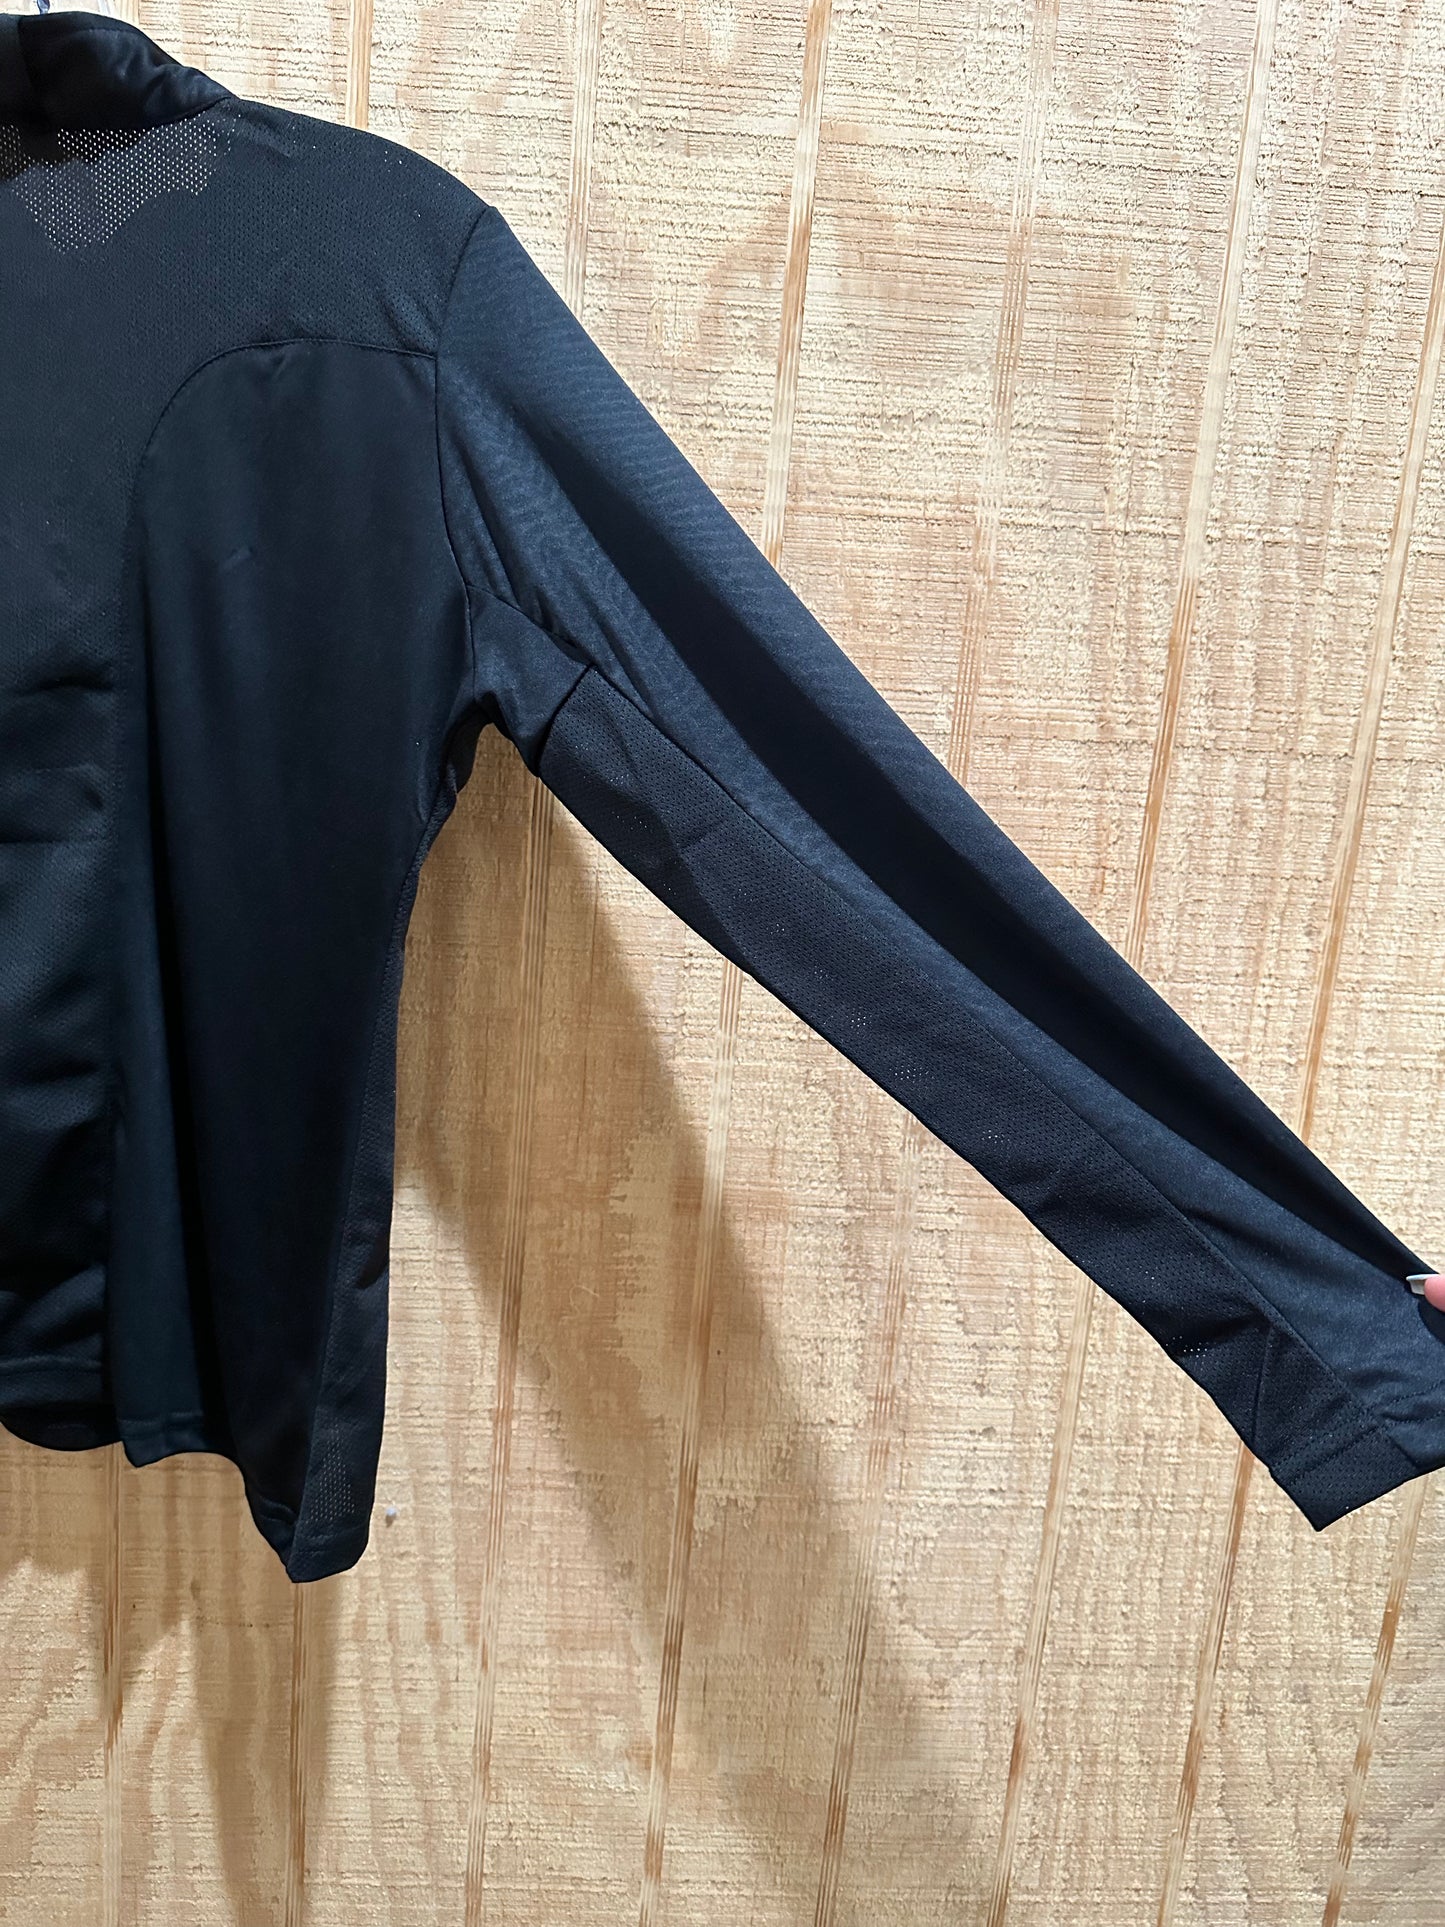 right sleeve of a black long sleeve riding shirt hung up against light colored wood